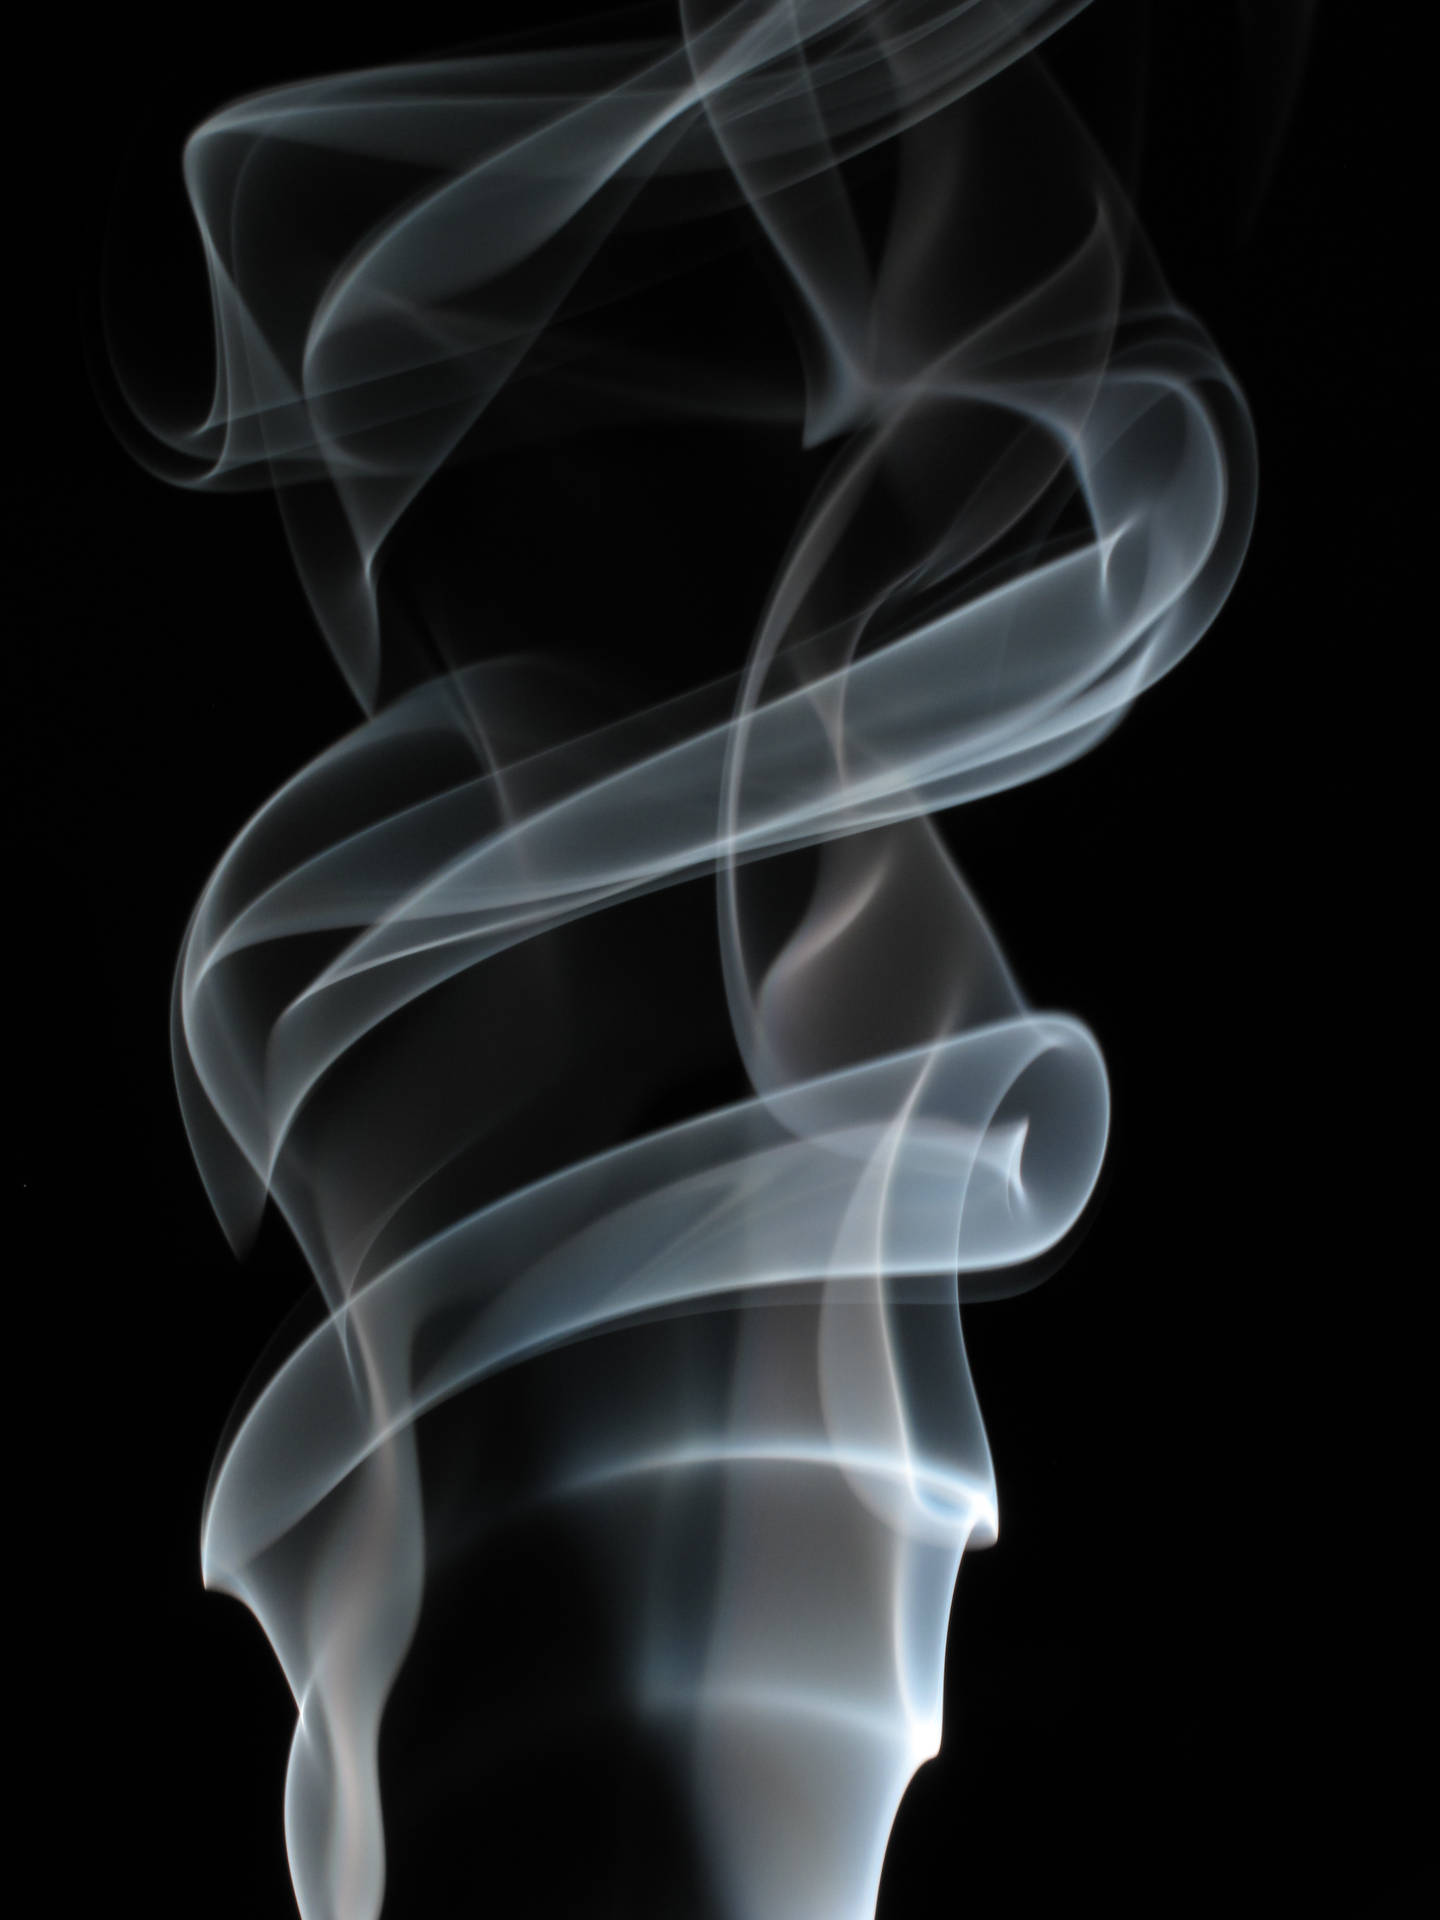 Pop Smoke 3312X4416 Wallpaper and Background Image